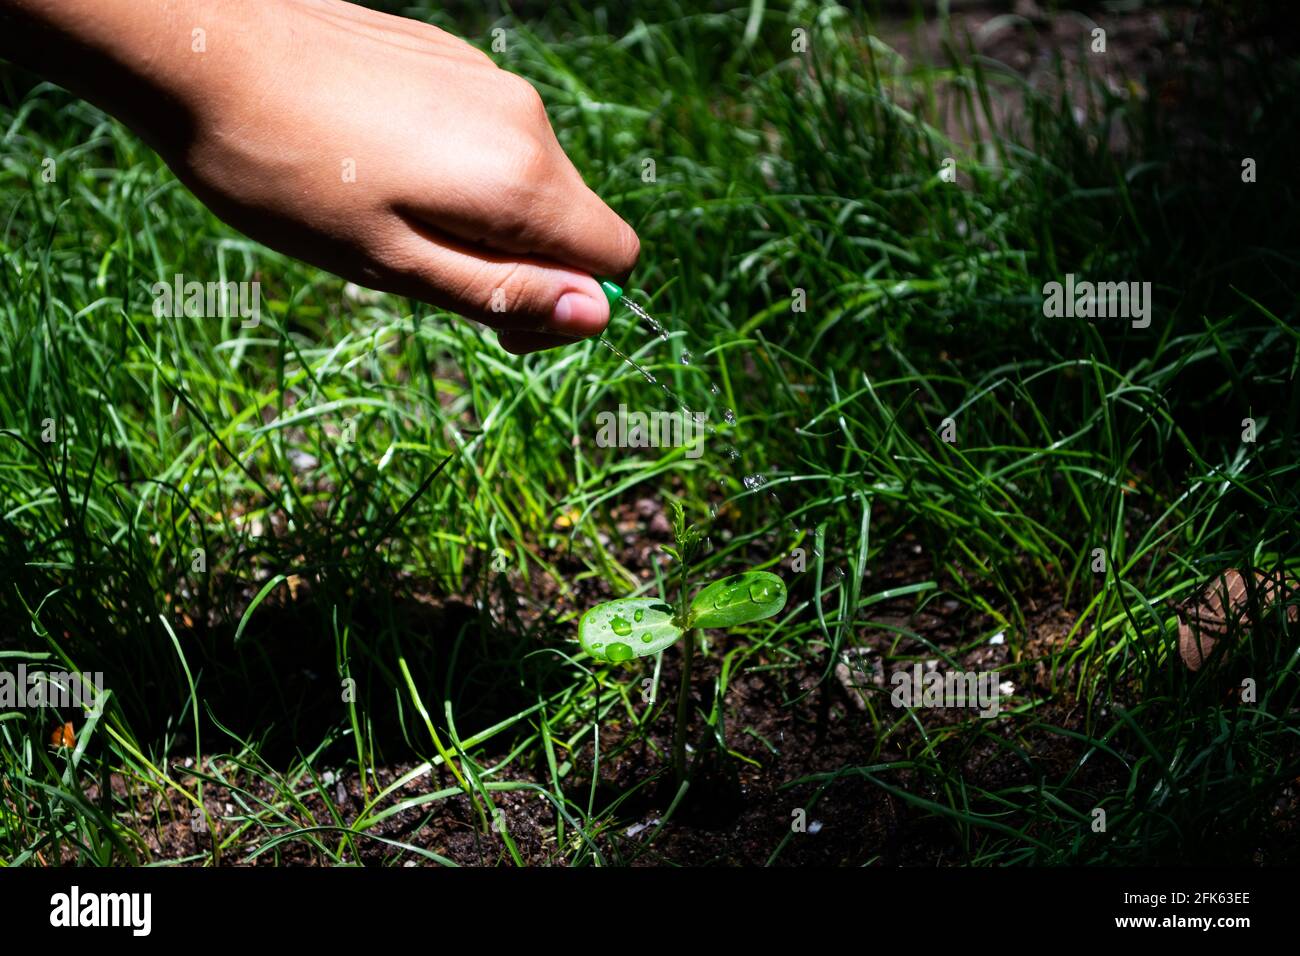 Closeup of fist over a plant seedling on the grassy ground Stock Photo